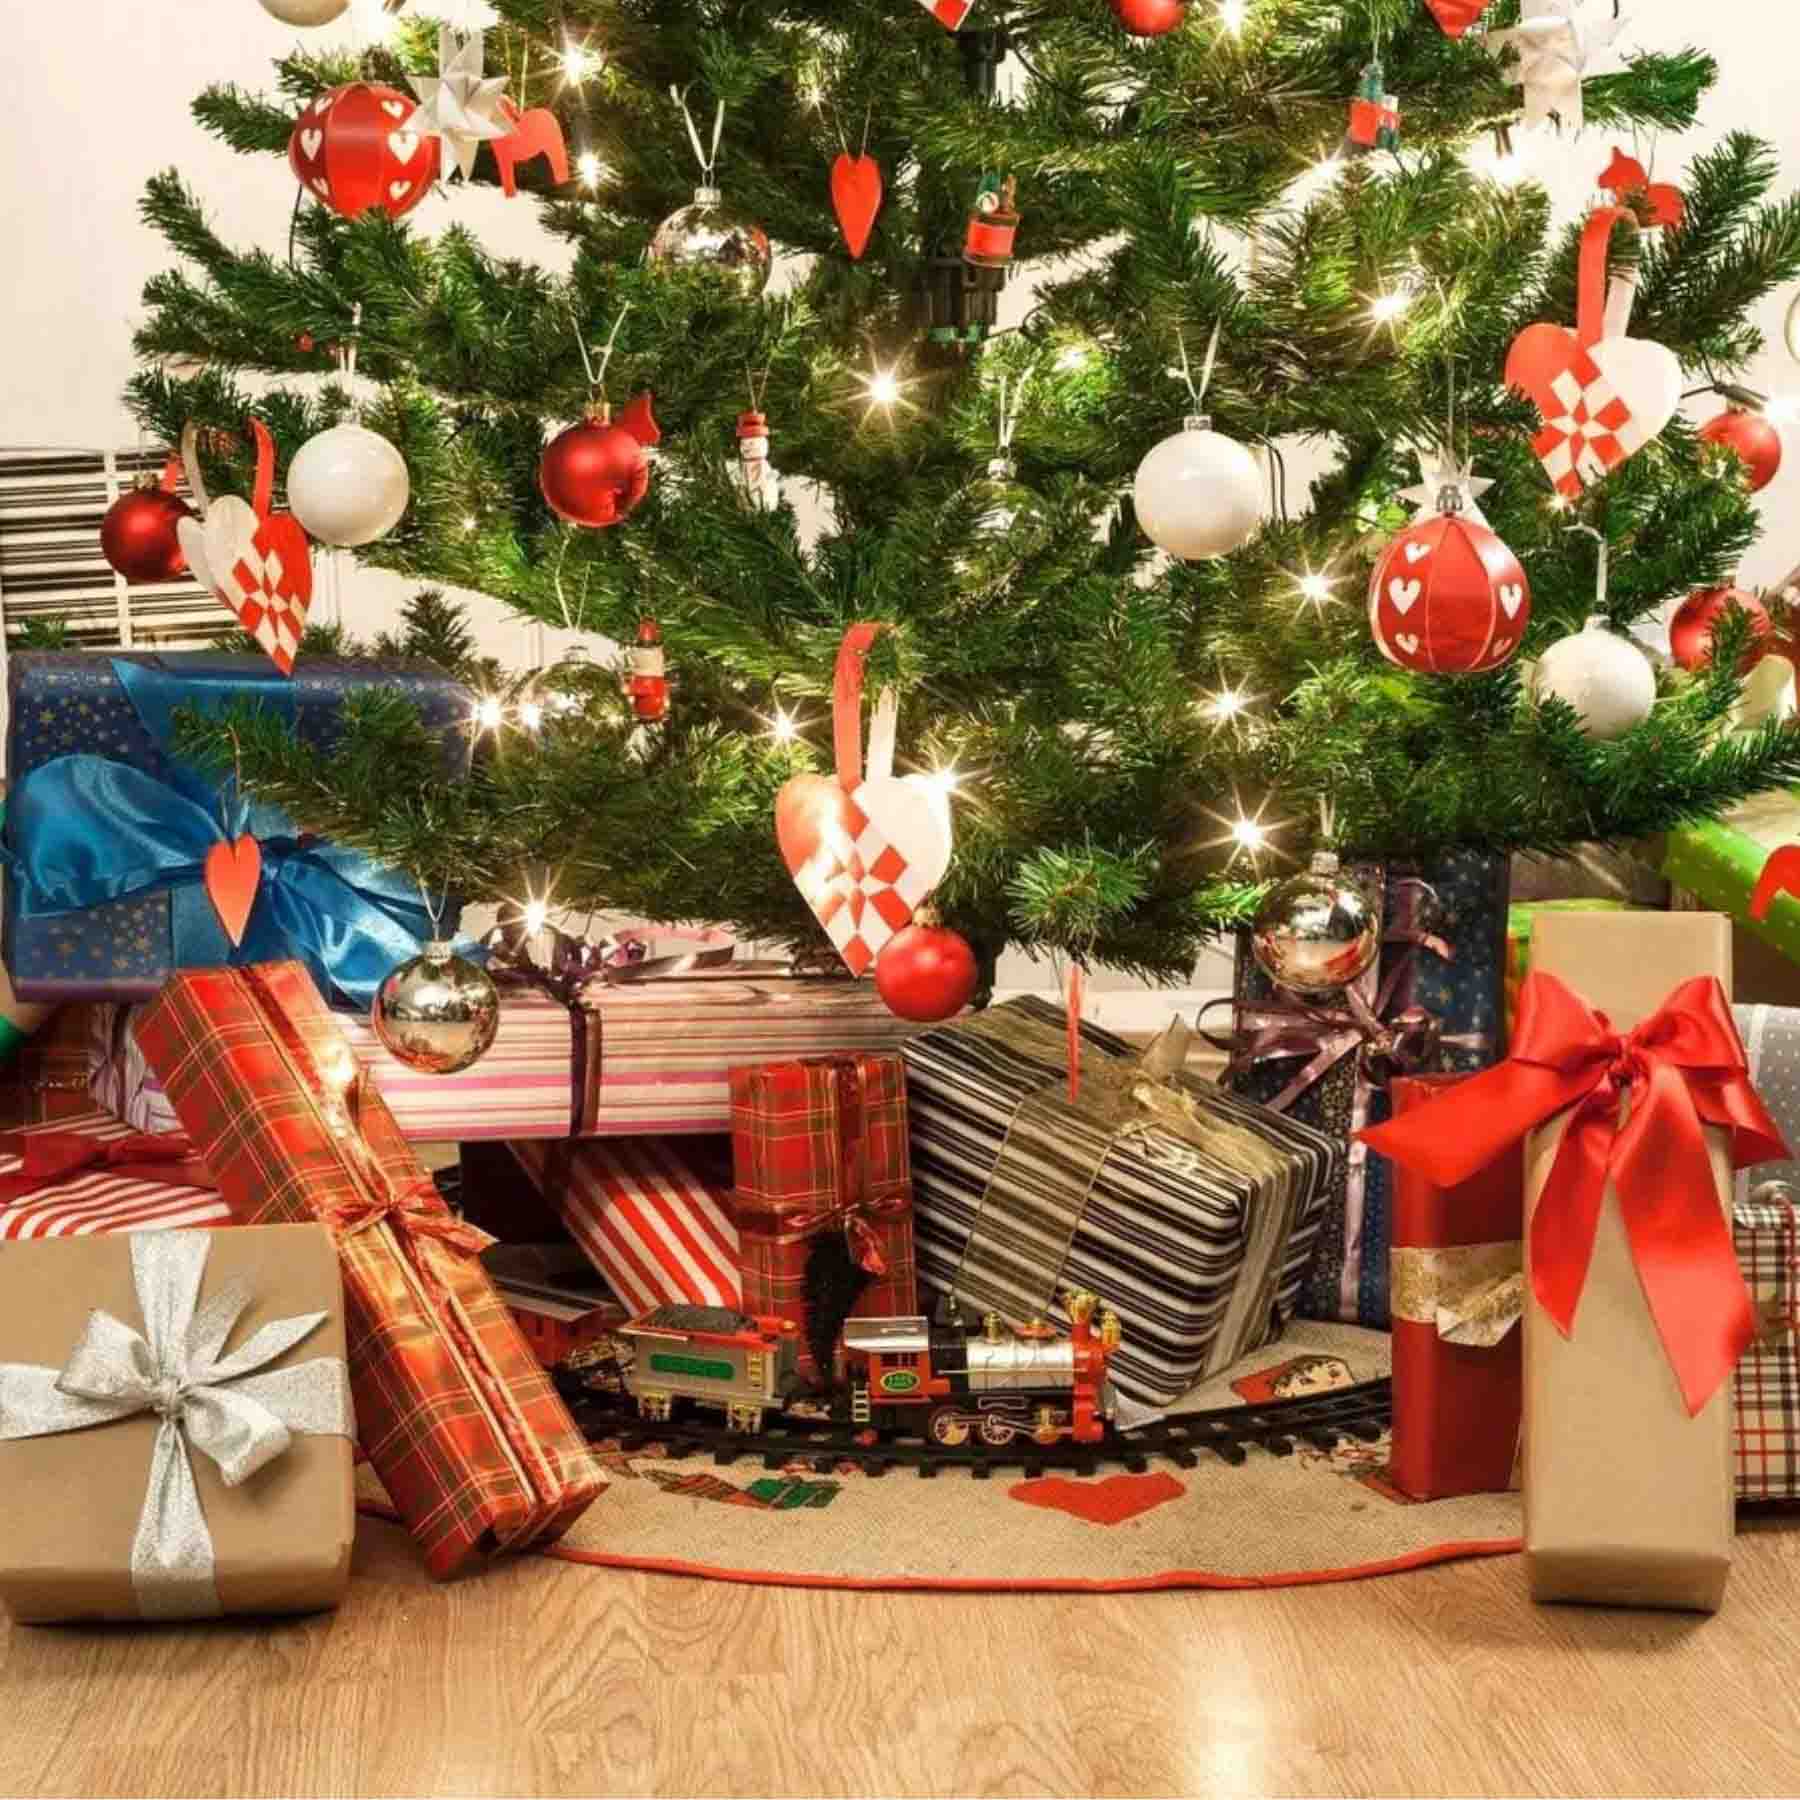 embrace the holiday joy but be mindful of the waste generated through christmas gift wrapping